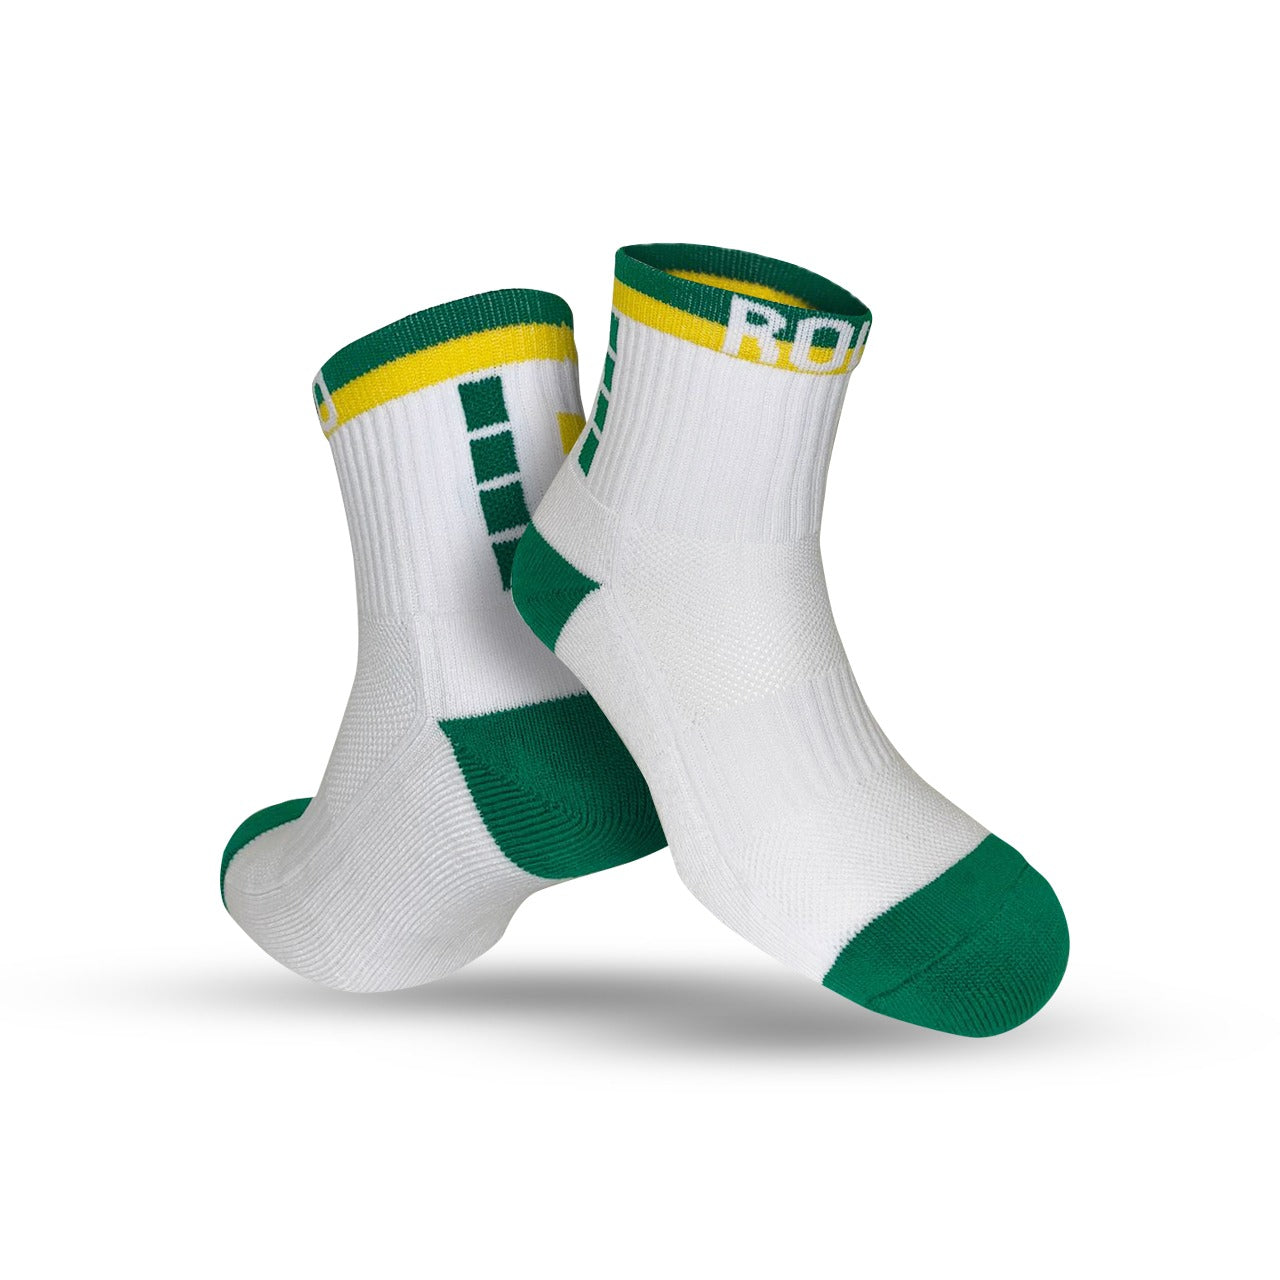 Low Rise Cushioned Ankle Socks - Green/Yellow/White